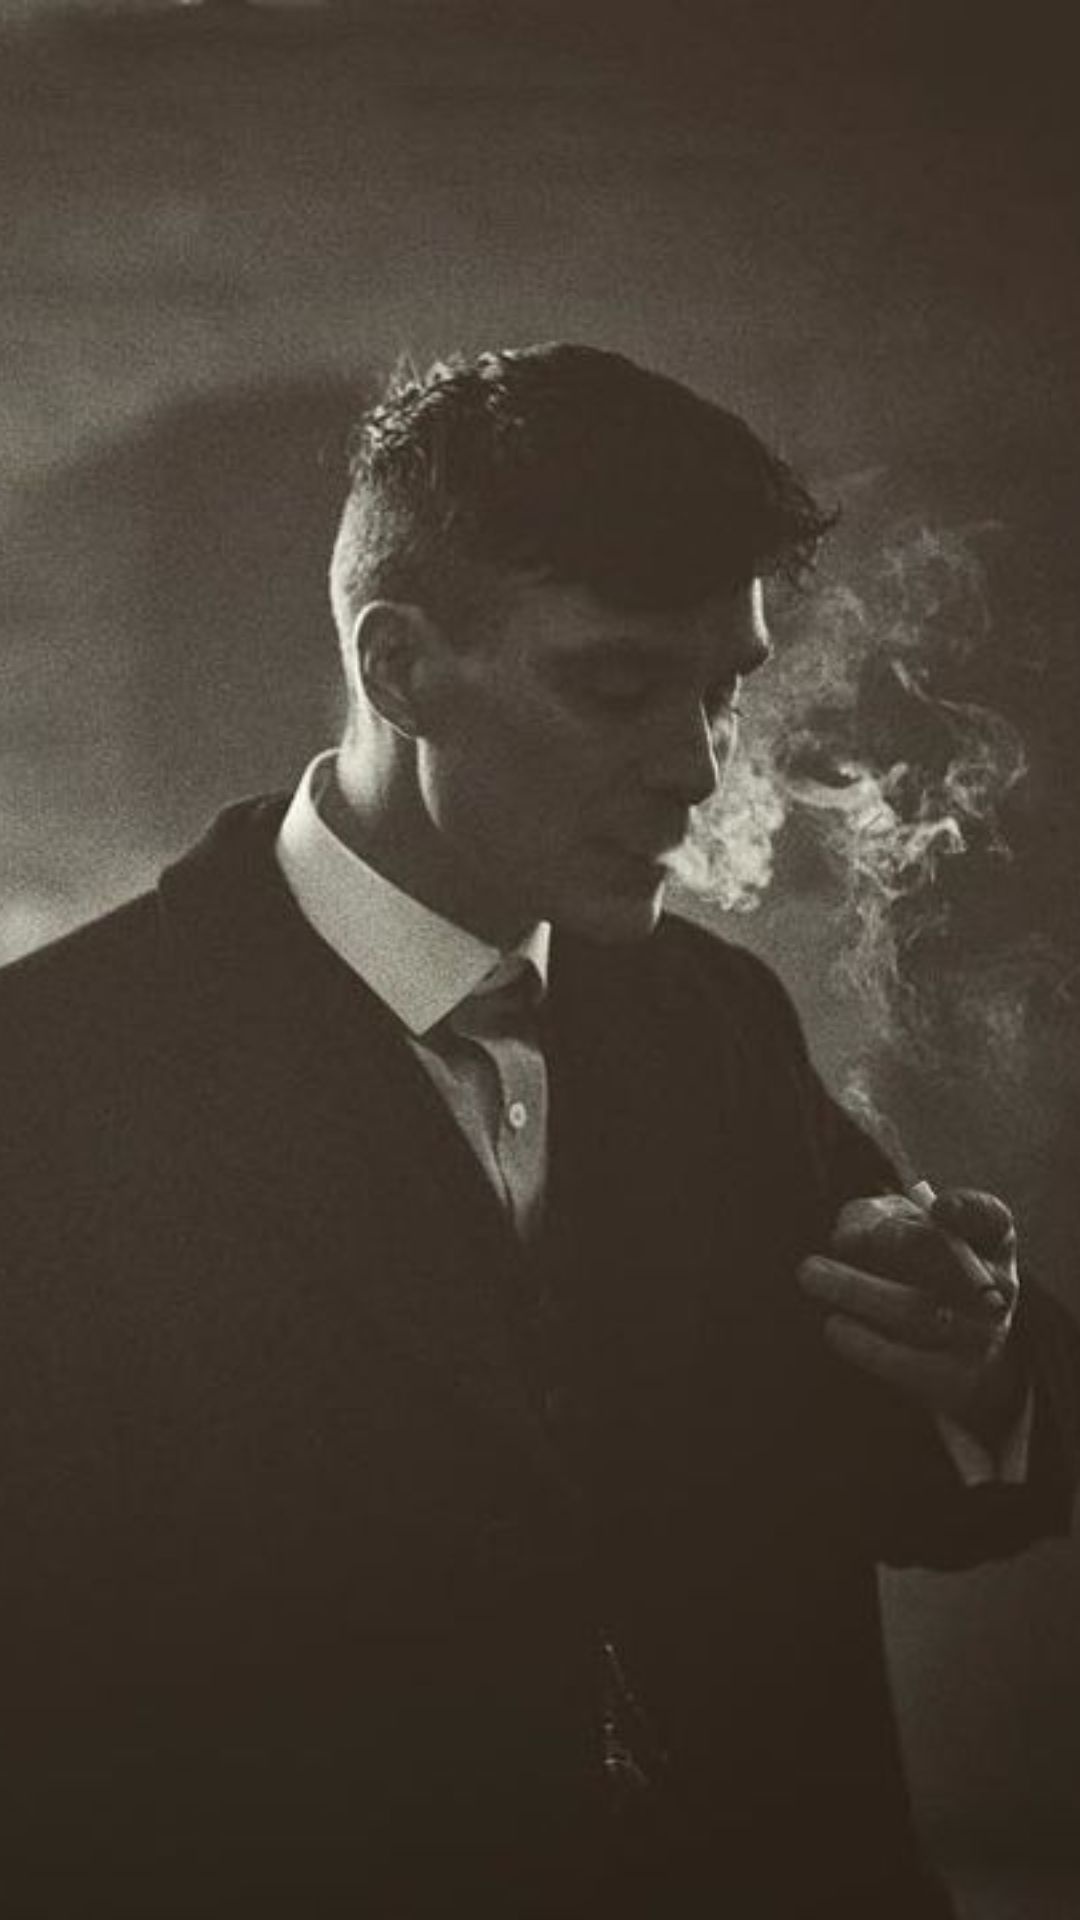 Shelby Family, I am Peaky Blinders, TV show wallpapers, Gangster drama, 1080x1920 Full HD Phone